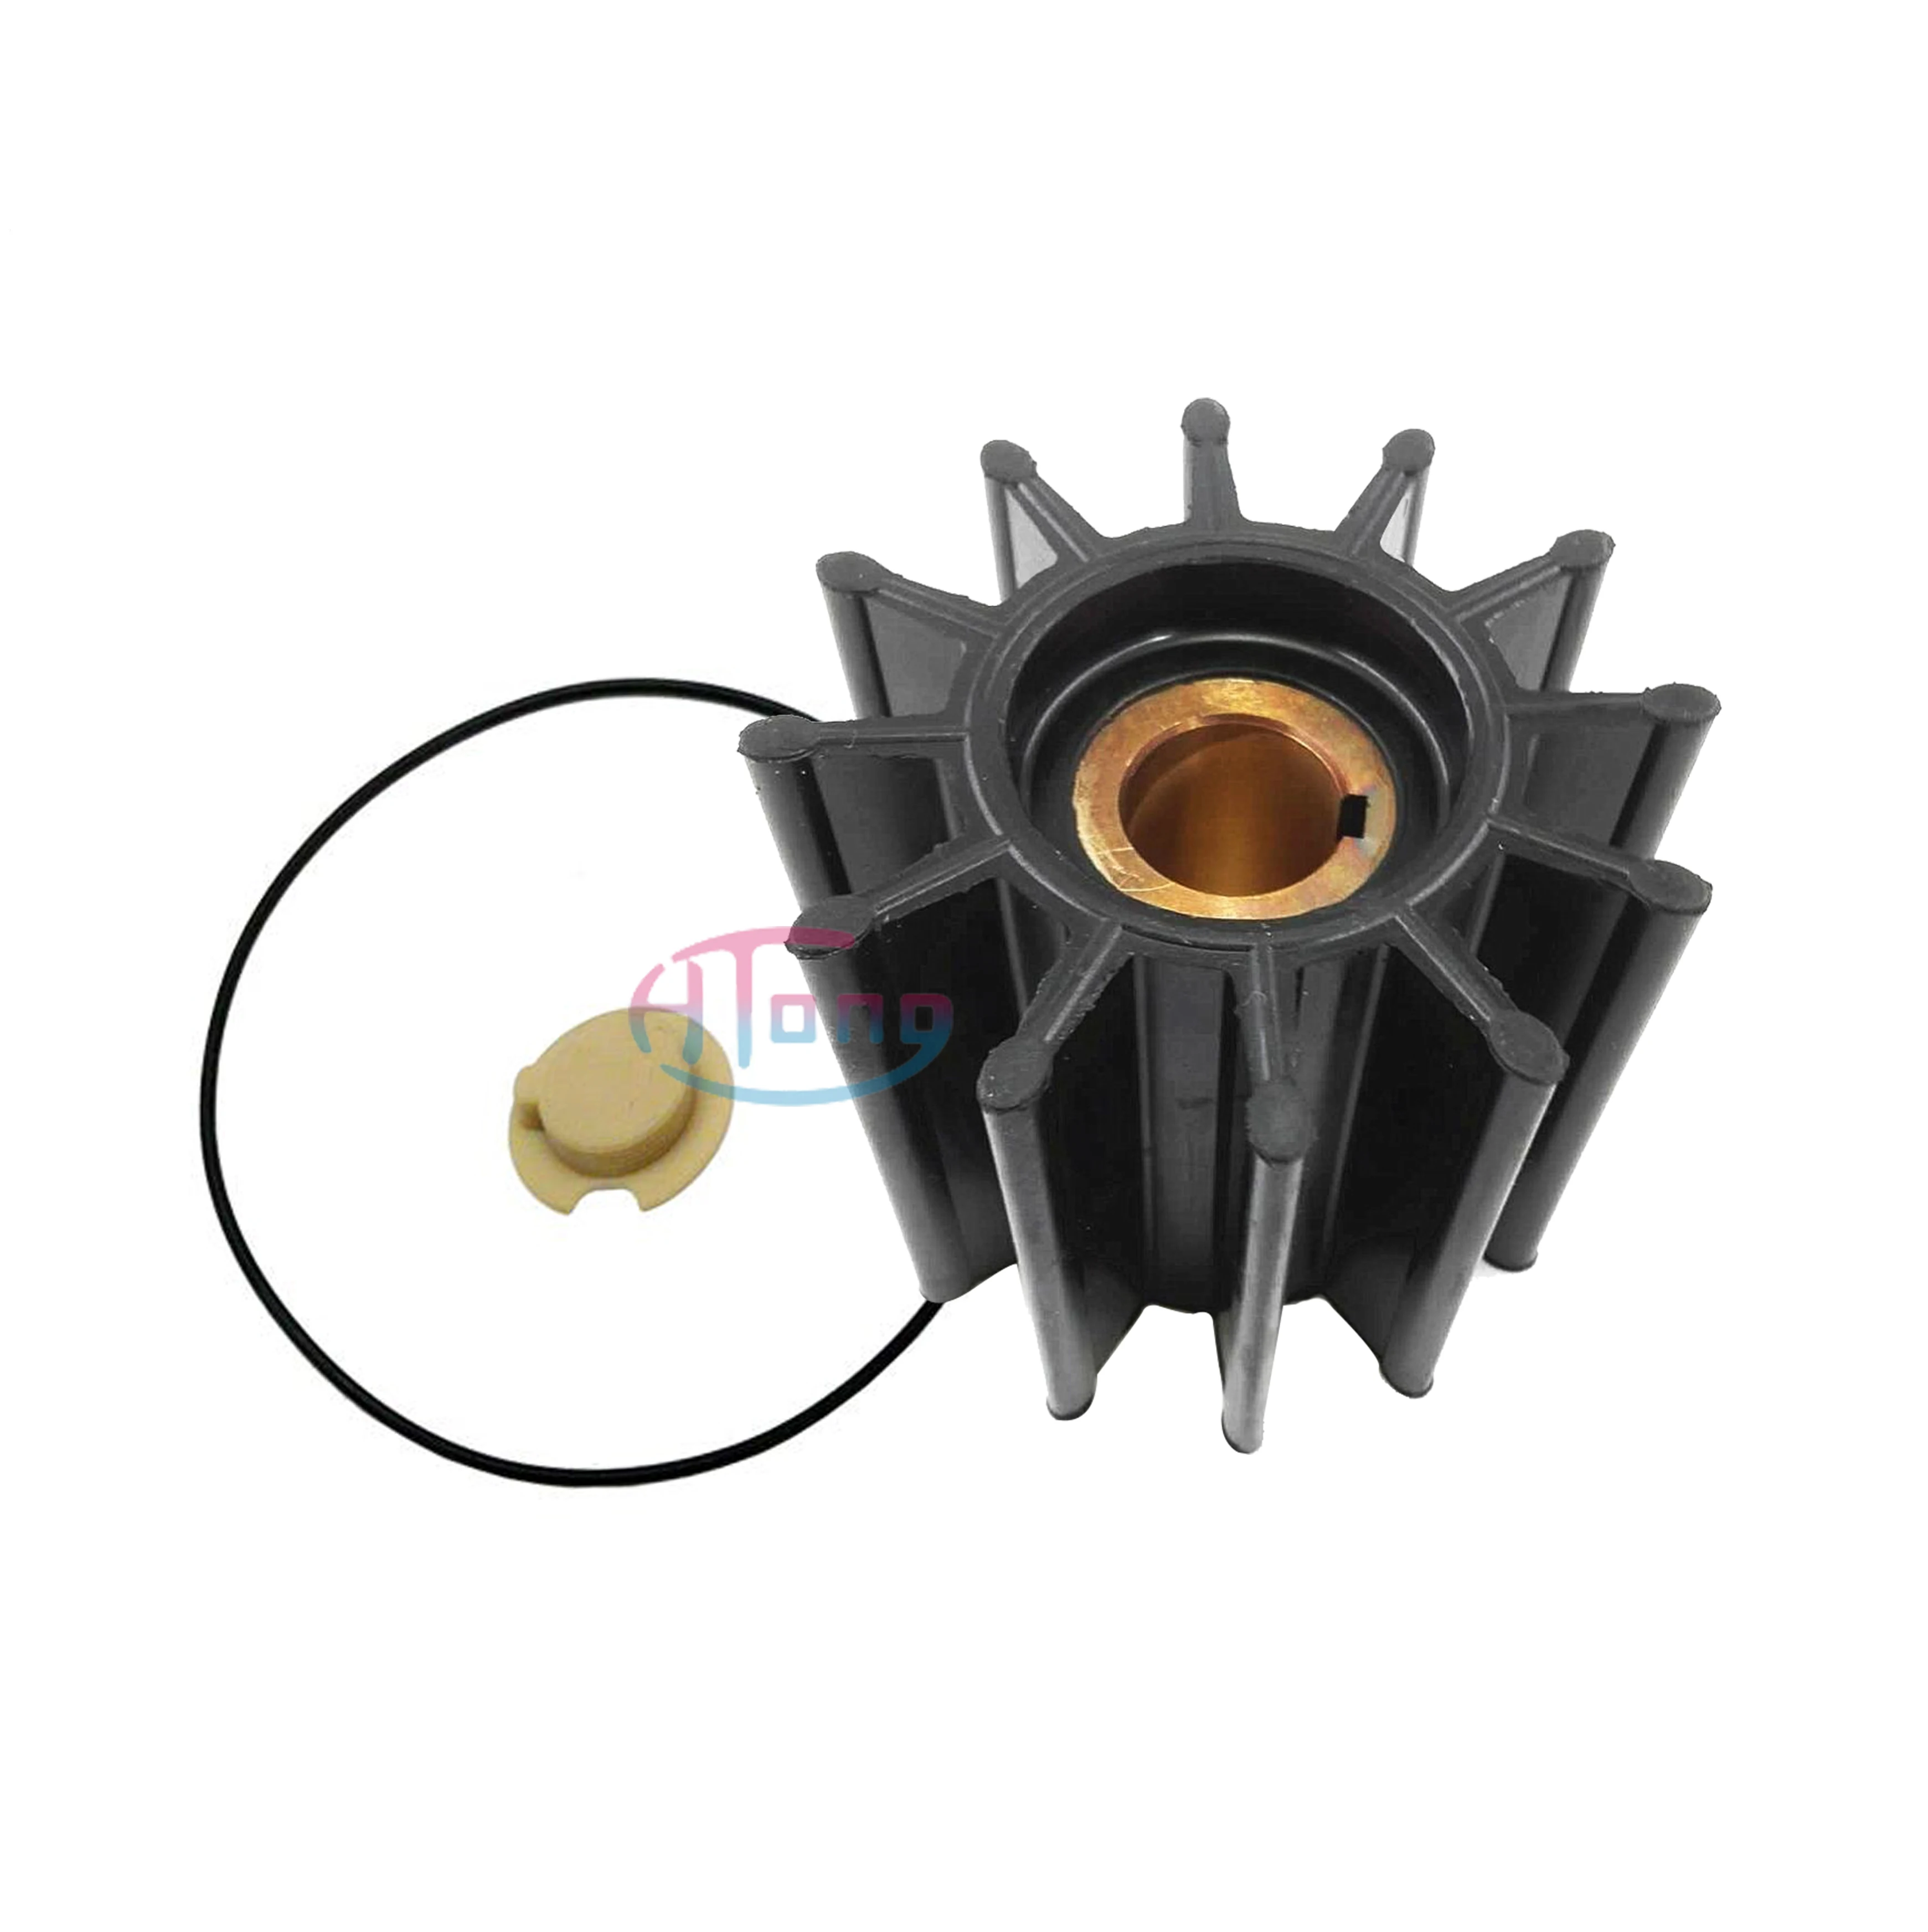 Source Water pump P17000 Series Pump Parts Stainless steel Shaft 19620  25119 suit for Sherwood pump 17000K Flexible impeller on m.